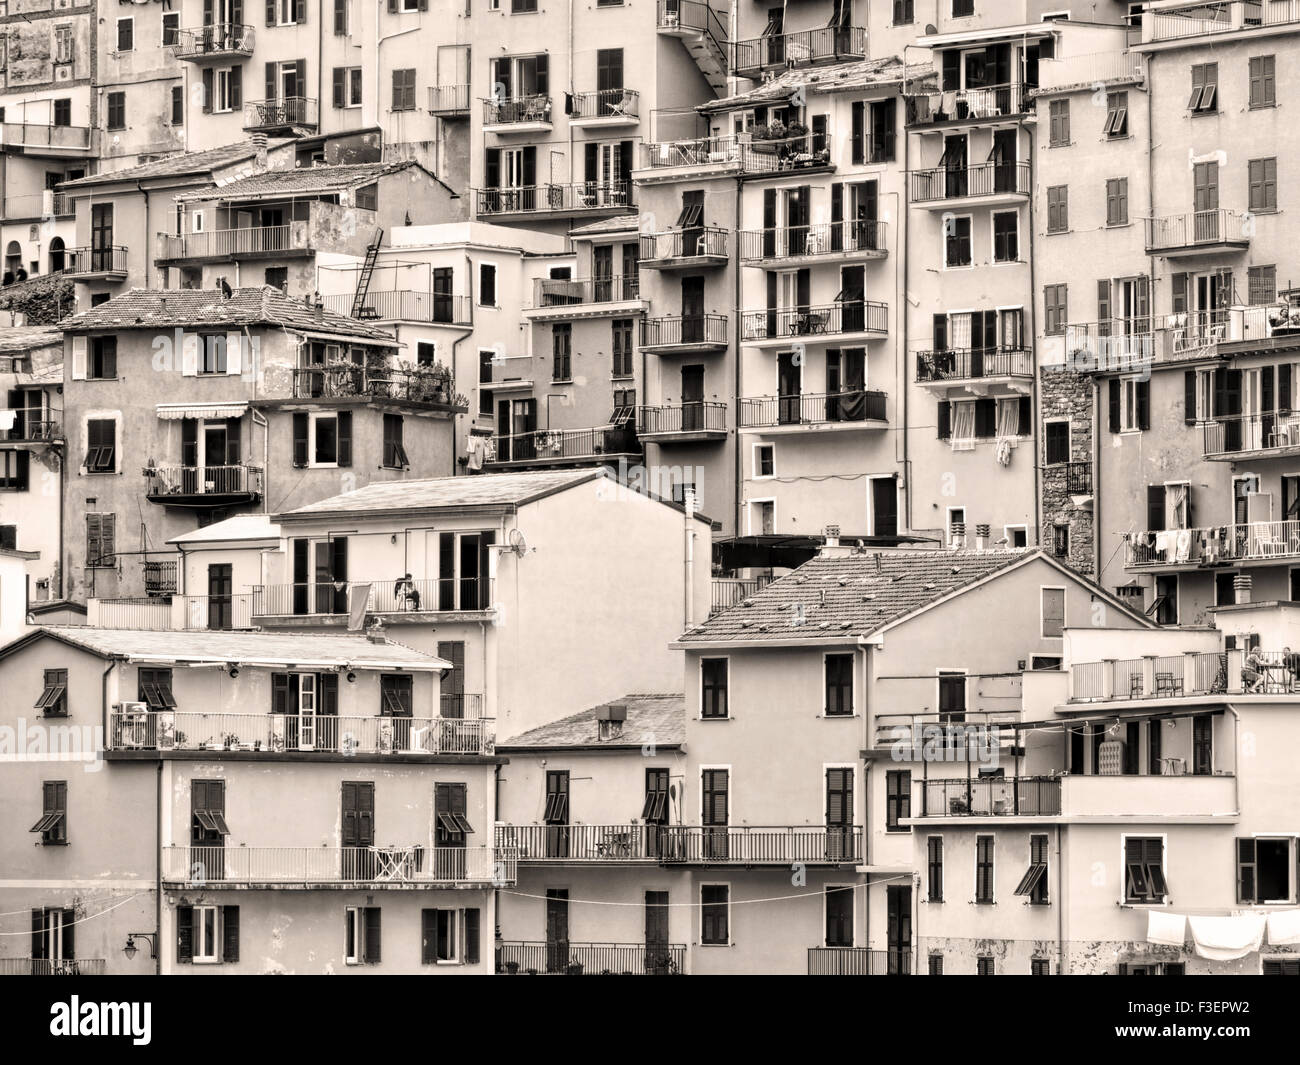 Manarola village in the Cinque Terre, Italy. Major tourist magnet in Italy. Tinted monochrom image to highlight the architecture Stock Photo